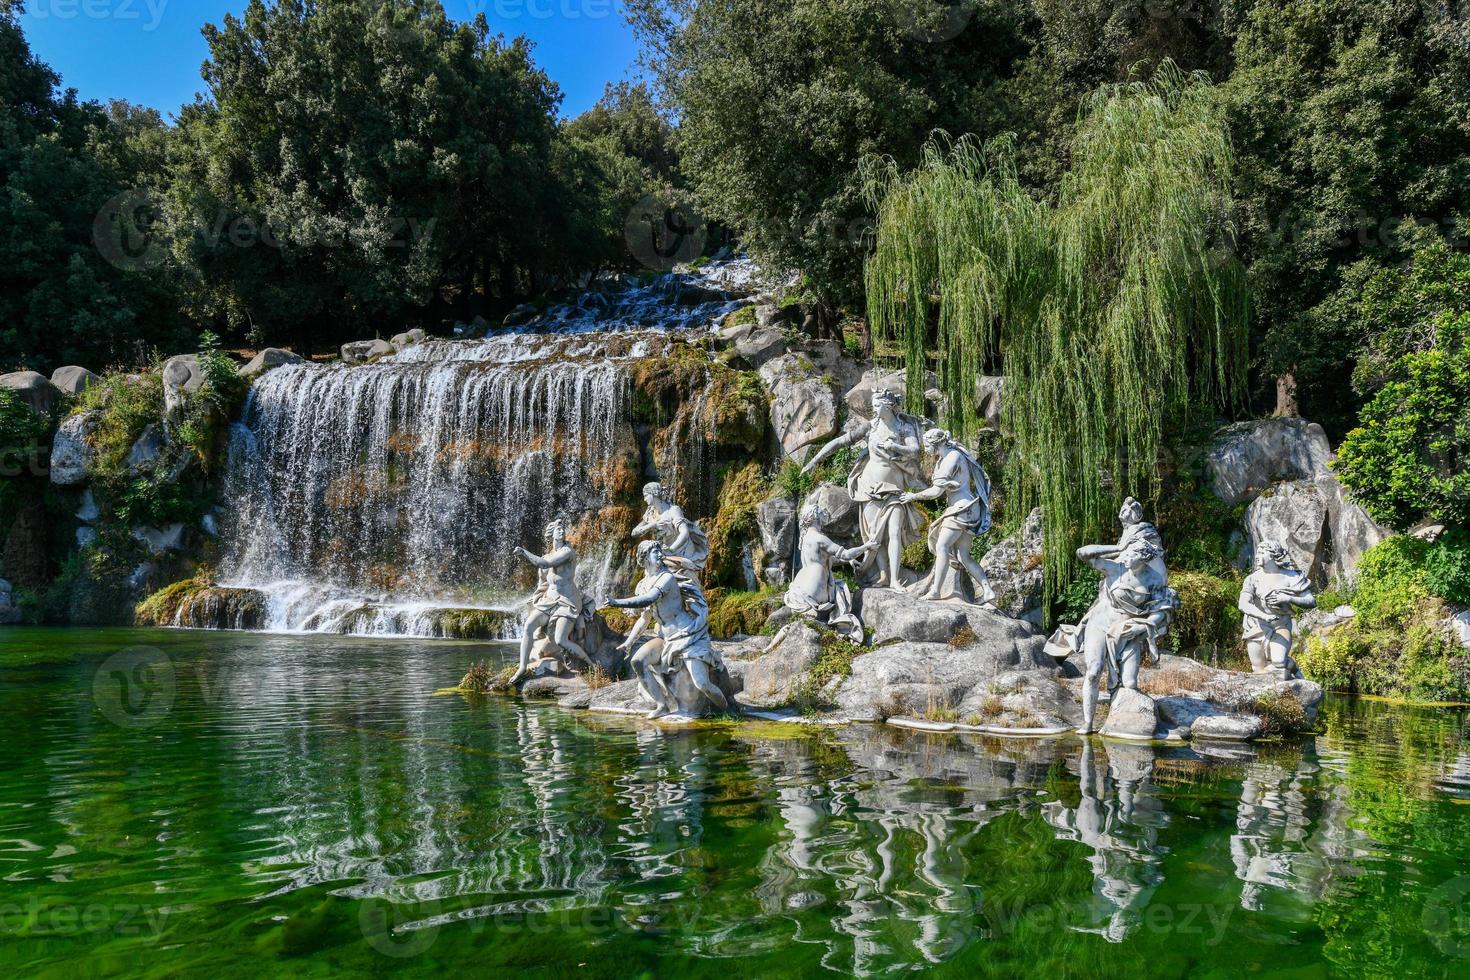 The Royal Palace of Caserta  Italian, Reggia di Caserta  is a former royal residence in Caserta, southern Italy, and was designated a UNESCO World Heritage Site. photo